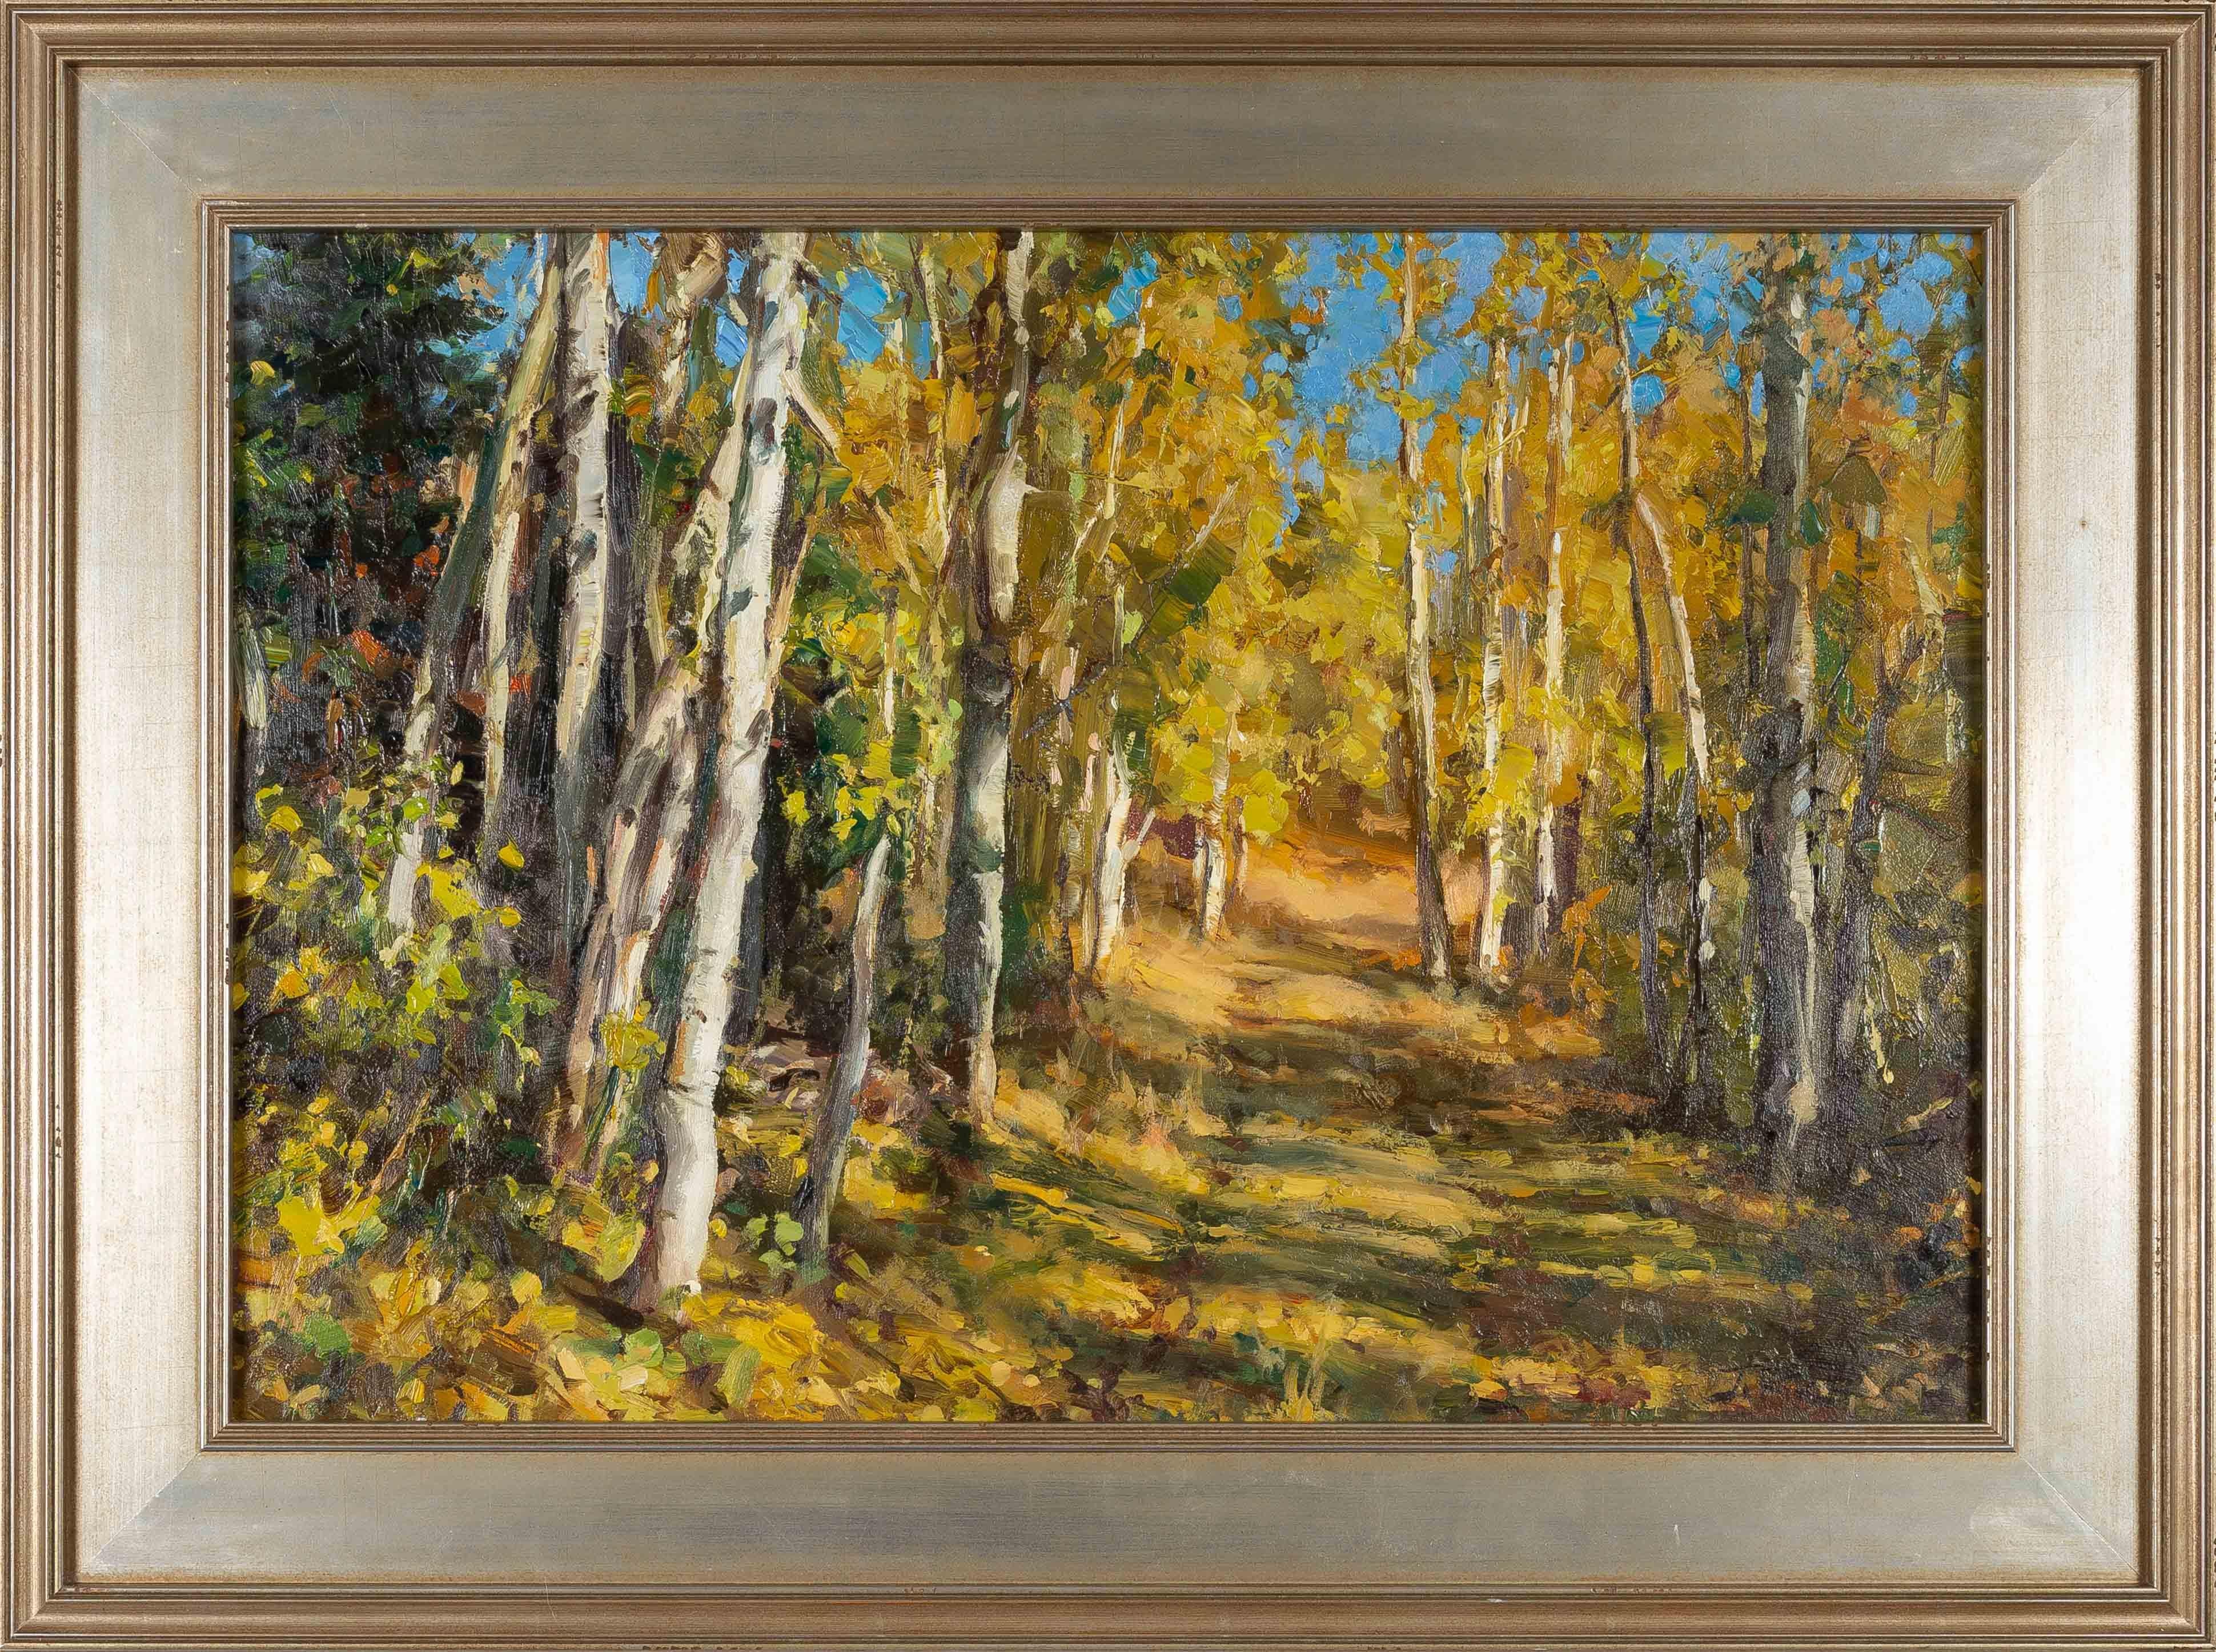 "Aspen Trail" by Jason Rich, Oil on Board, 16" x 24", 21" x 29" framed, hanging wire included on the back.

Jason Rich grew up riding, training, and drawing horses on a small farm in southern Idaho where a love of art and western life was